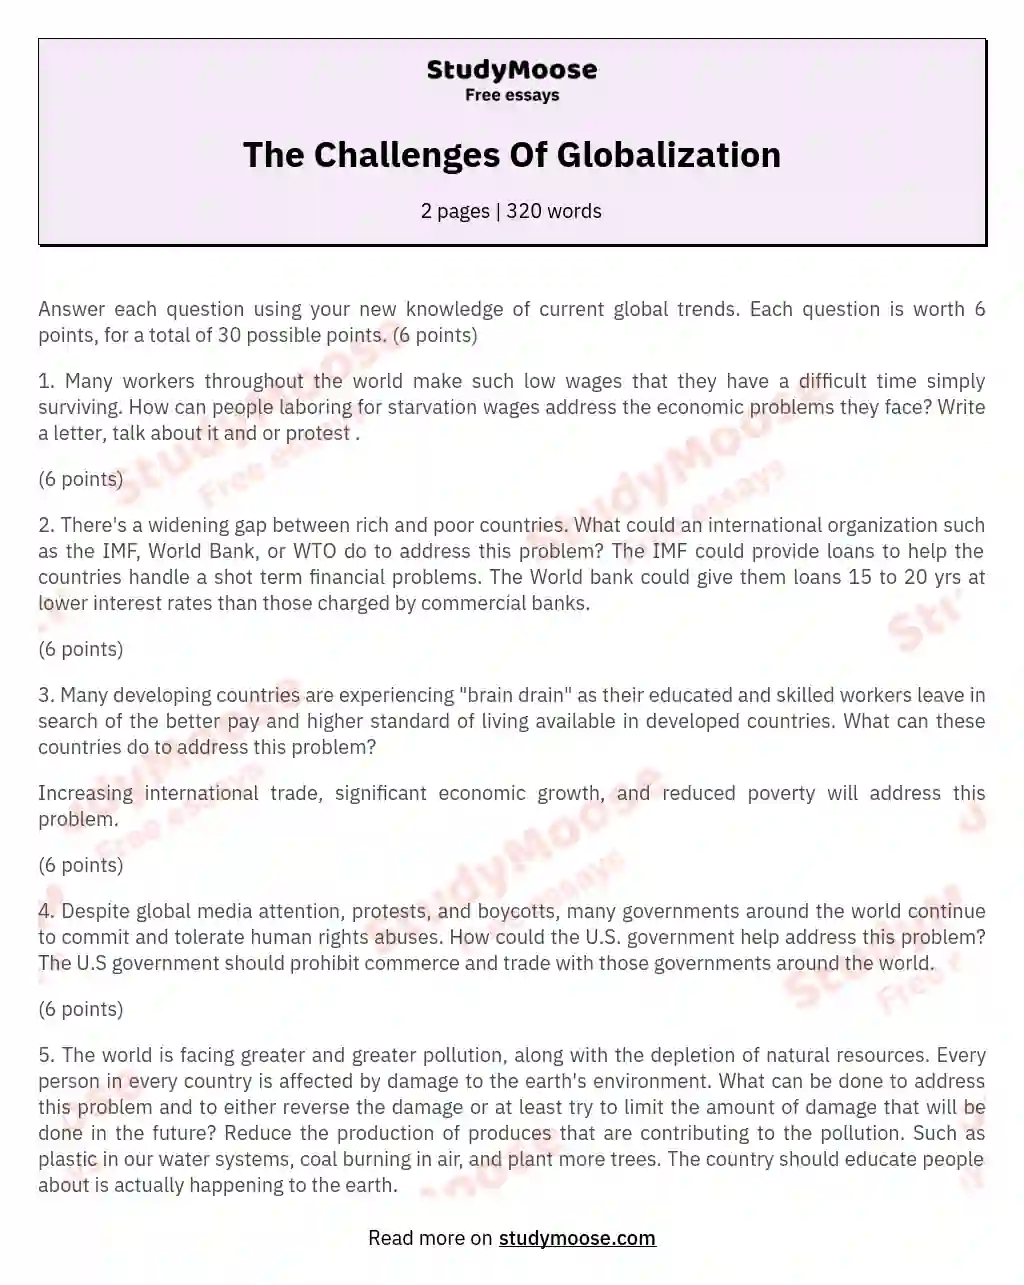 The Challenges Of Globalization